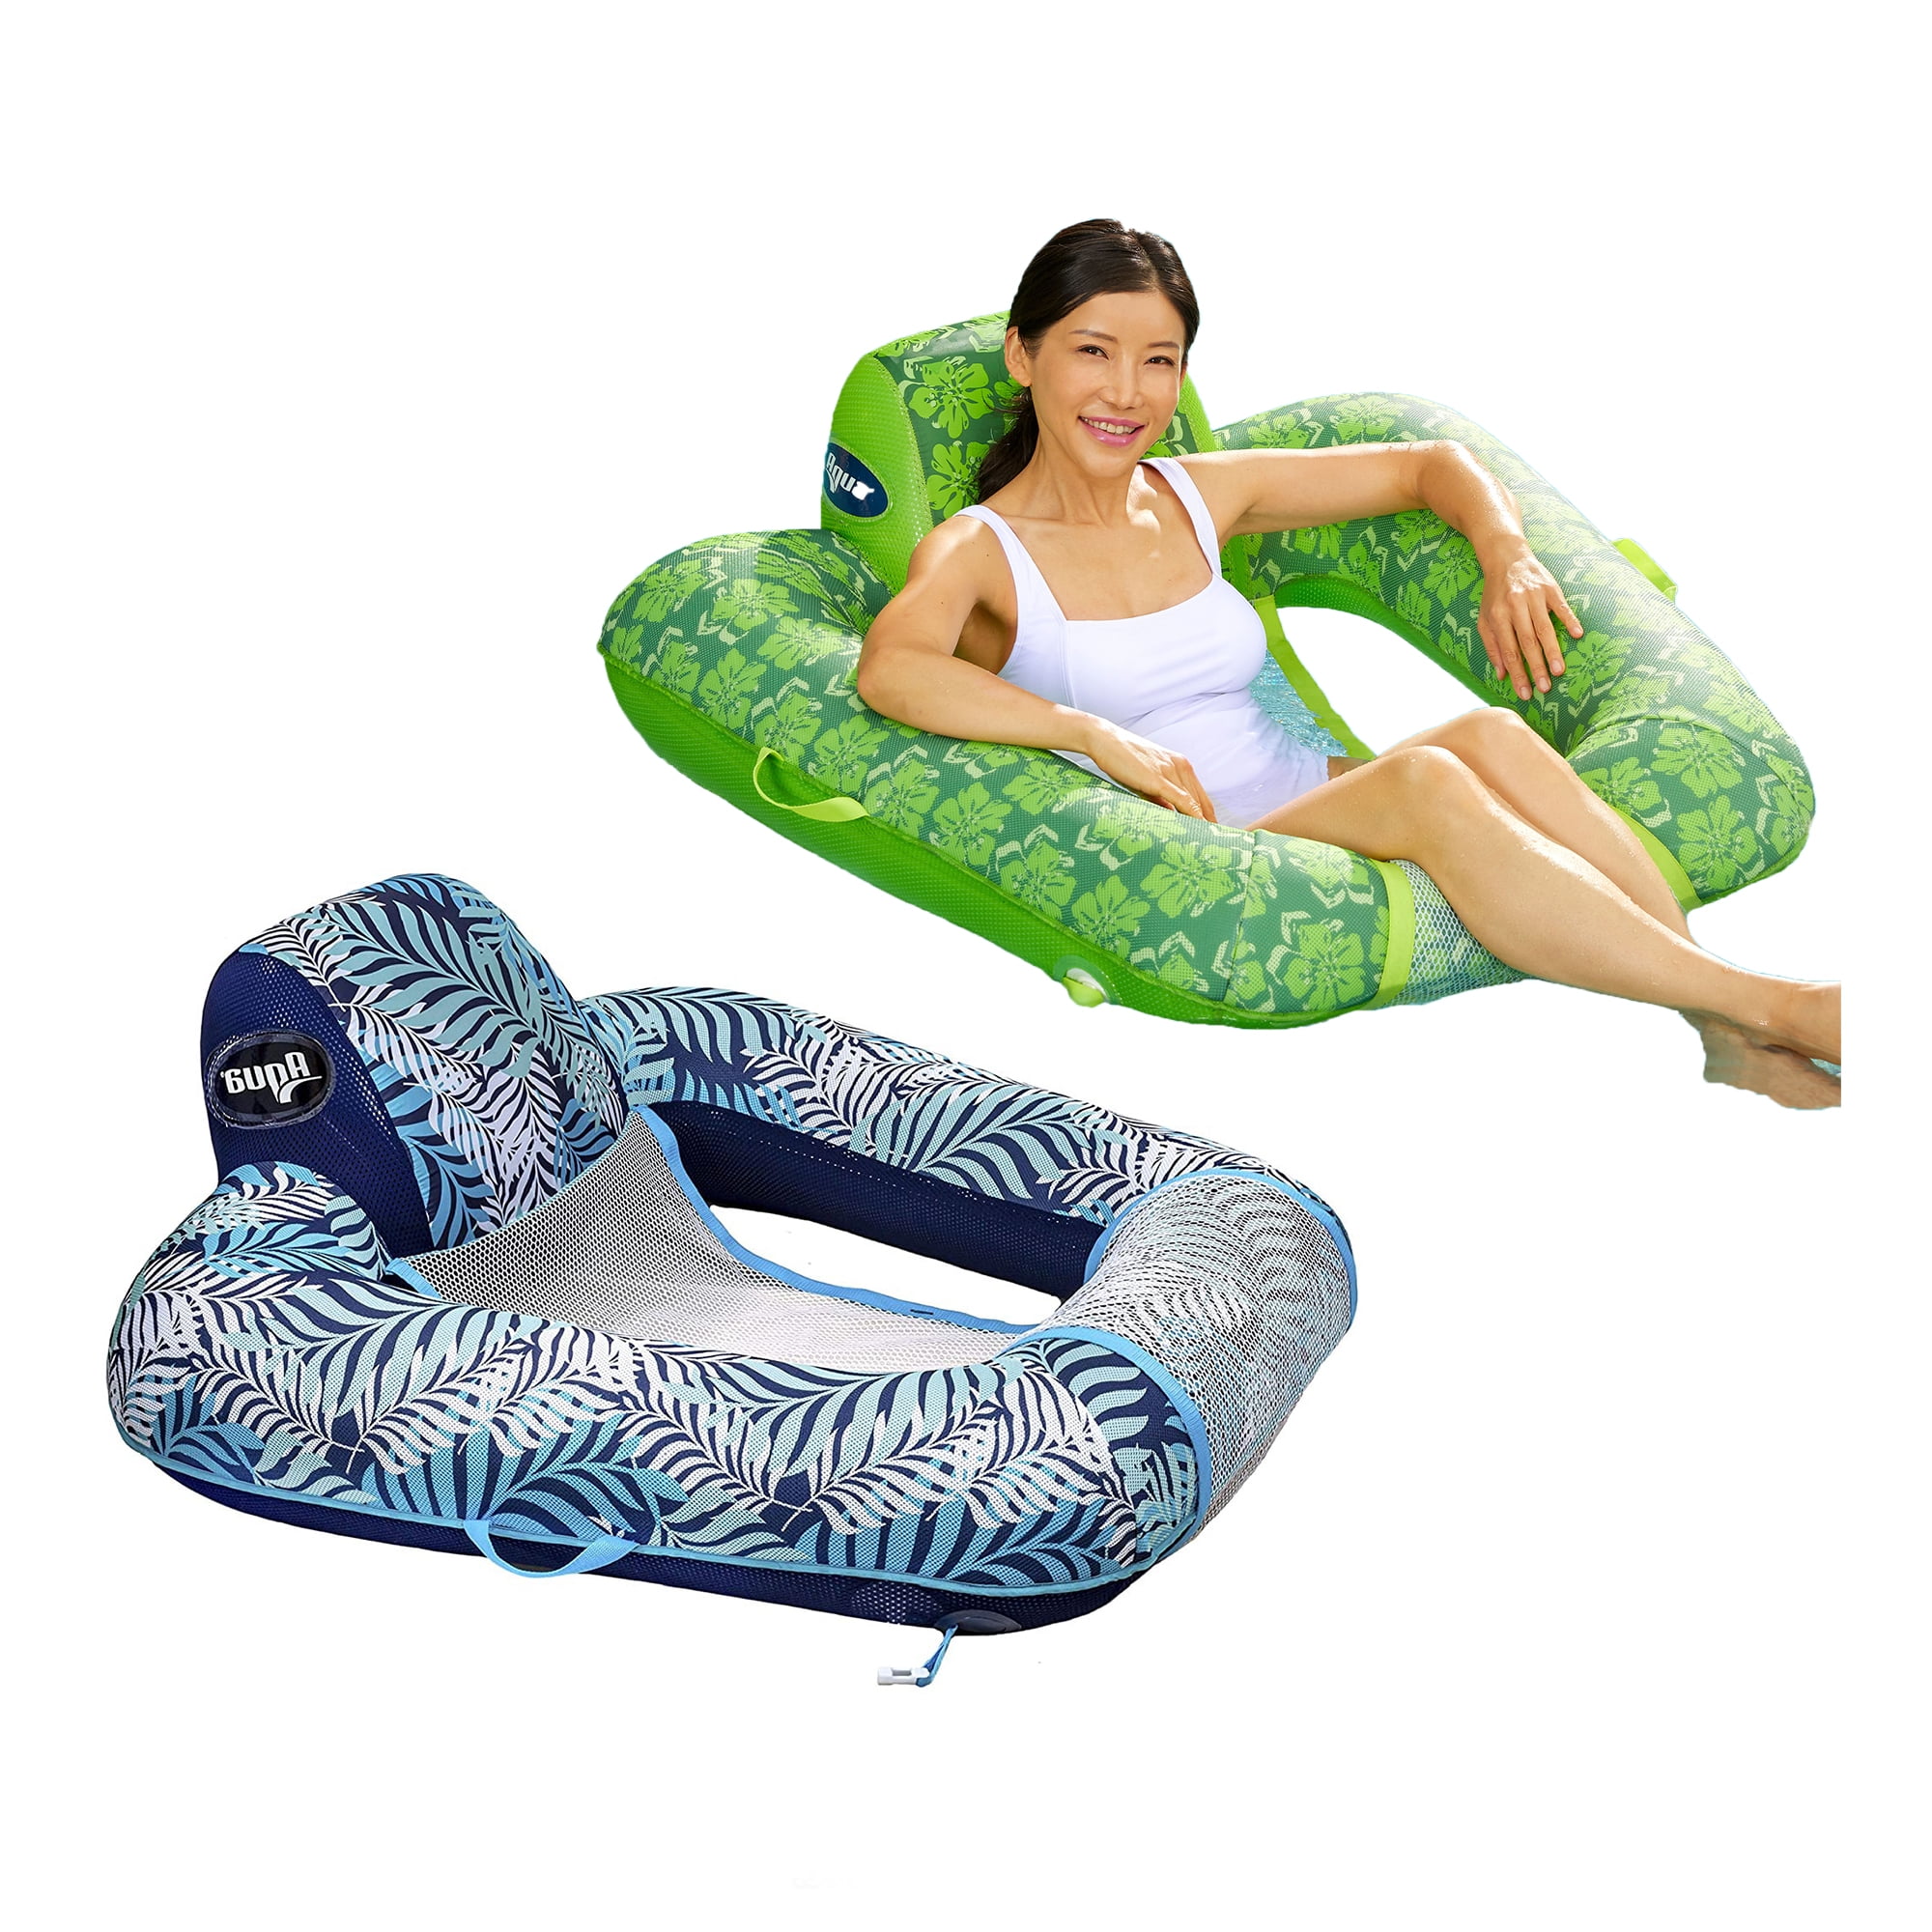 Aqua Zero Gravity Inflatable Comfort Swimming Pool Chair Lounge Float Blue Fern for sale online 